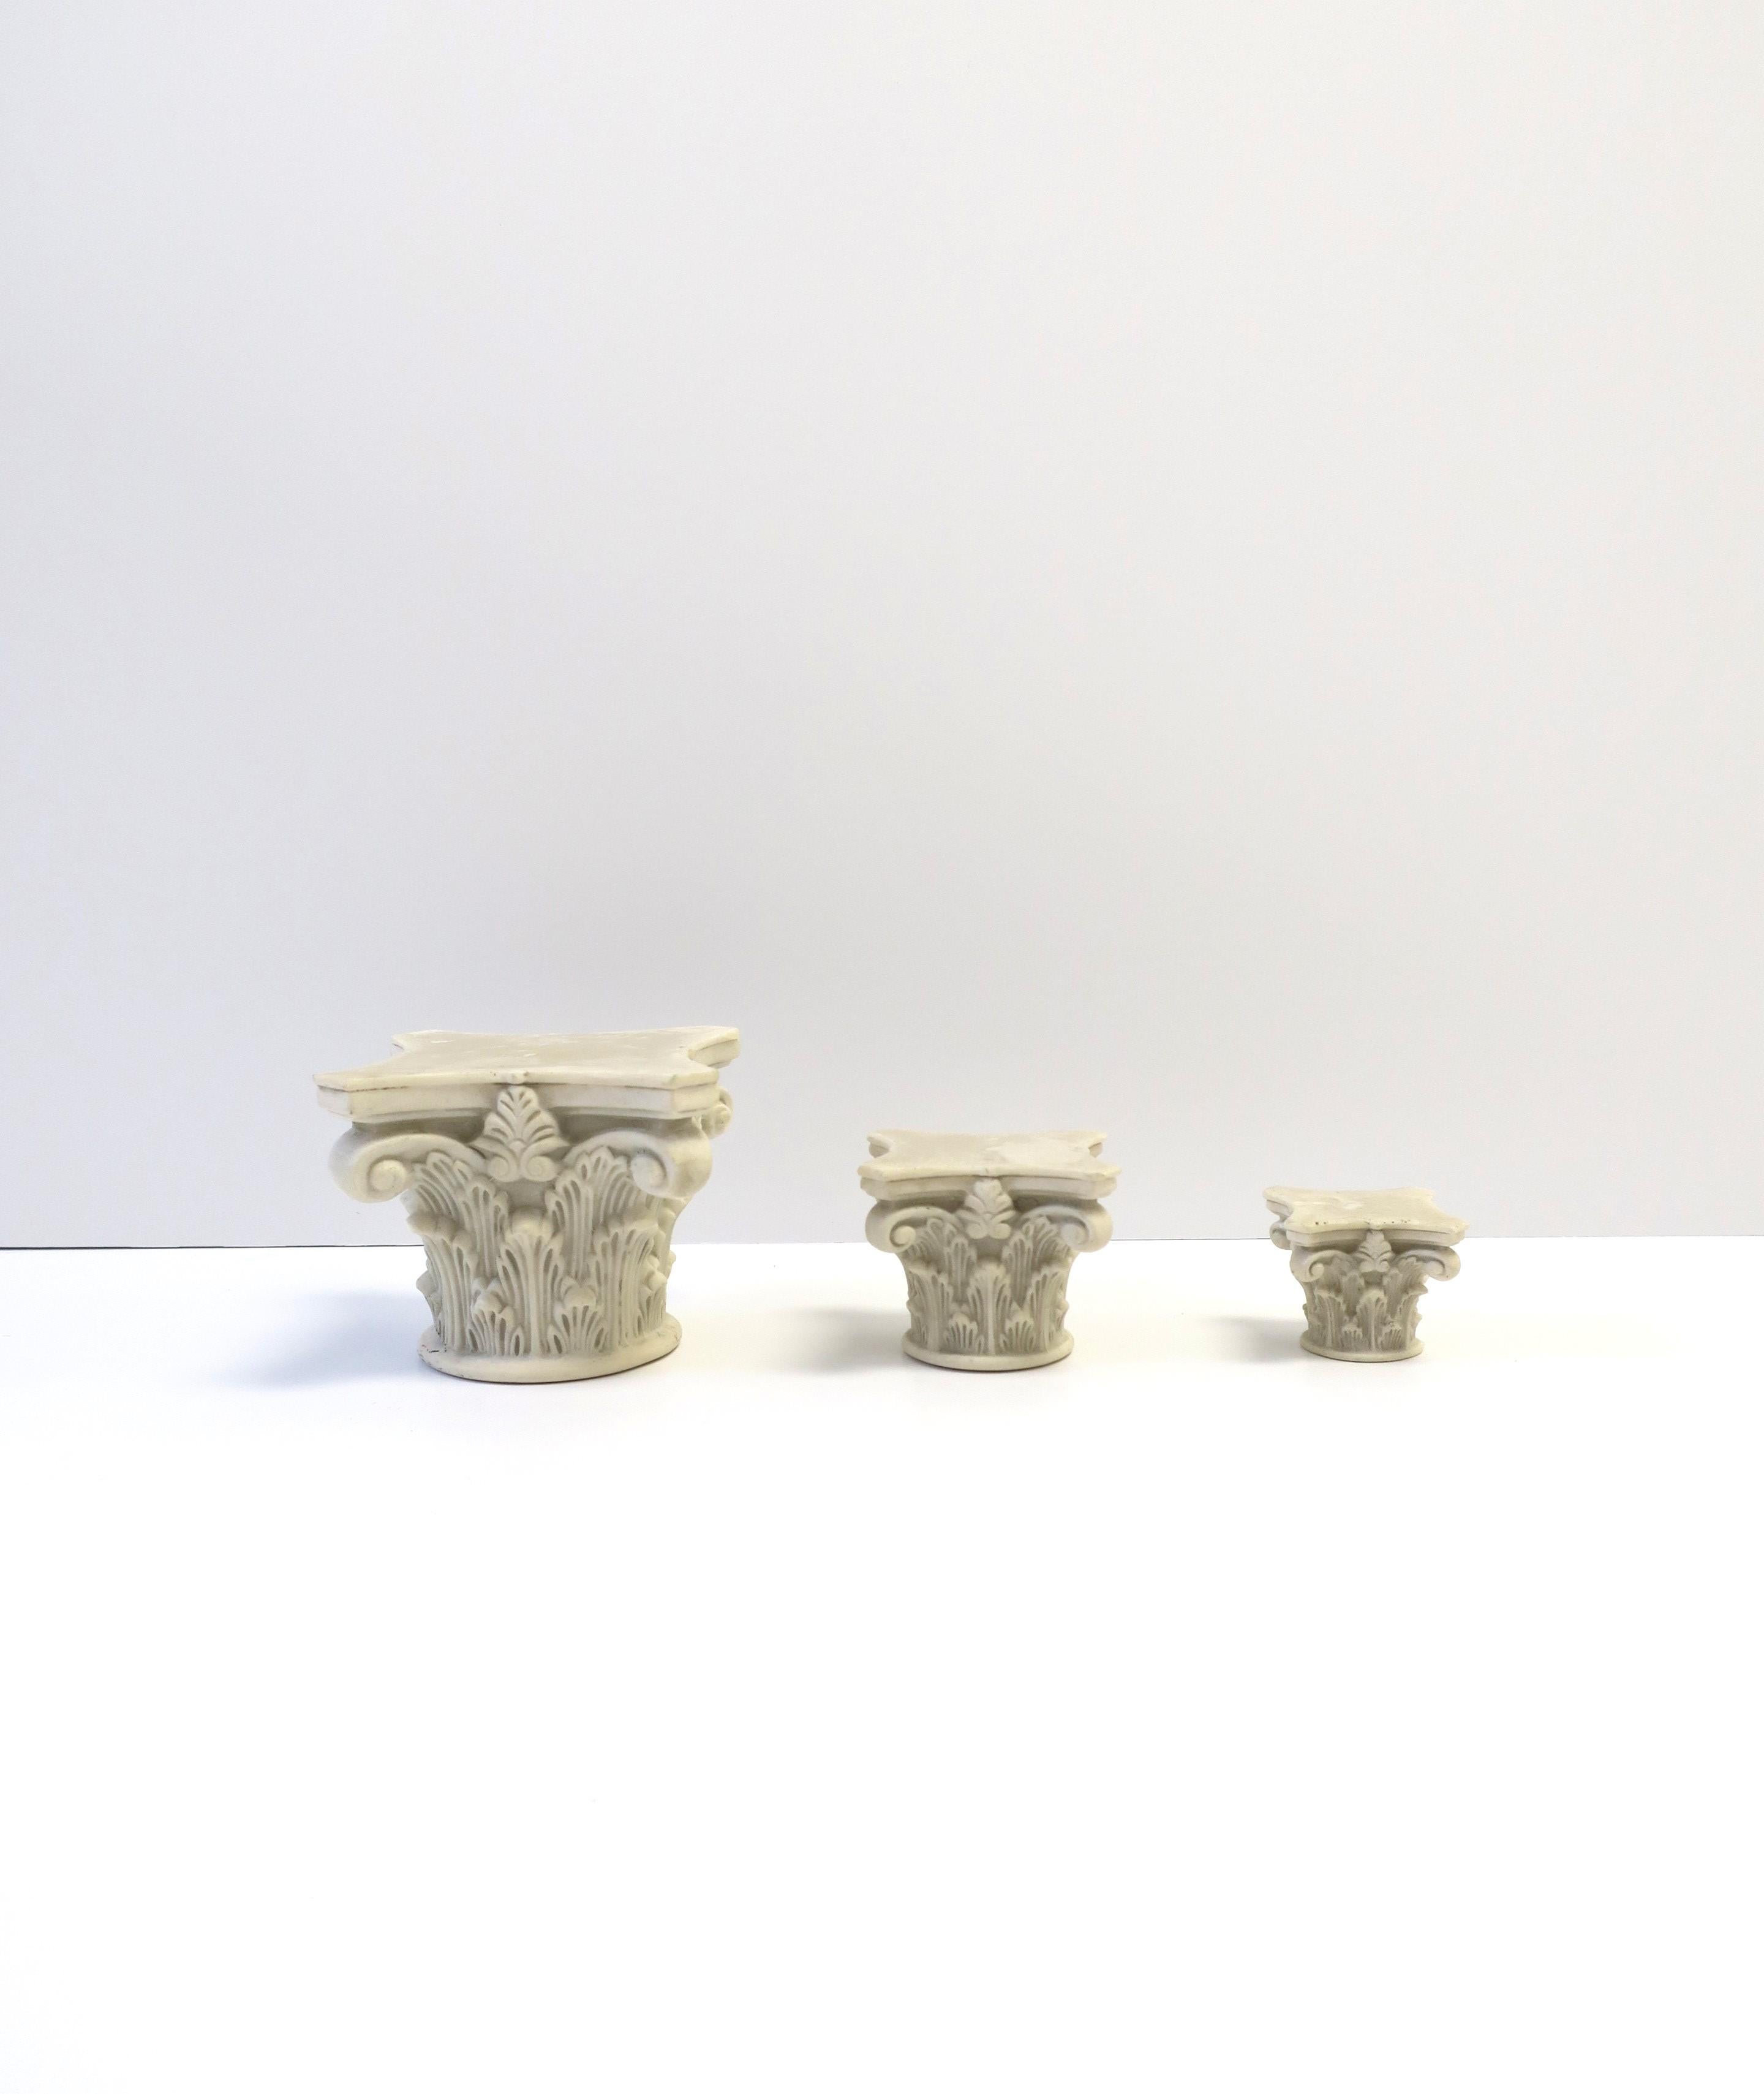 A set of three (3) Italian Corinthian column pillar capitol decorative objects in the Neoclassical style, circa mid-20th century, Italy. A great set of objects for a table, desk, office, library, etc. 

Dimensions: 
Large: 3.25